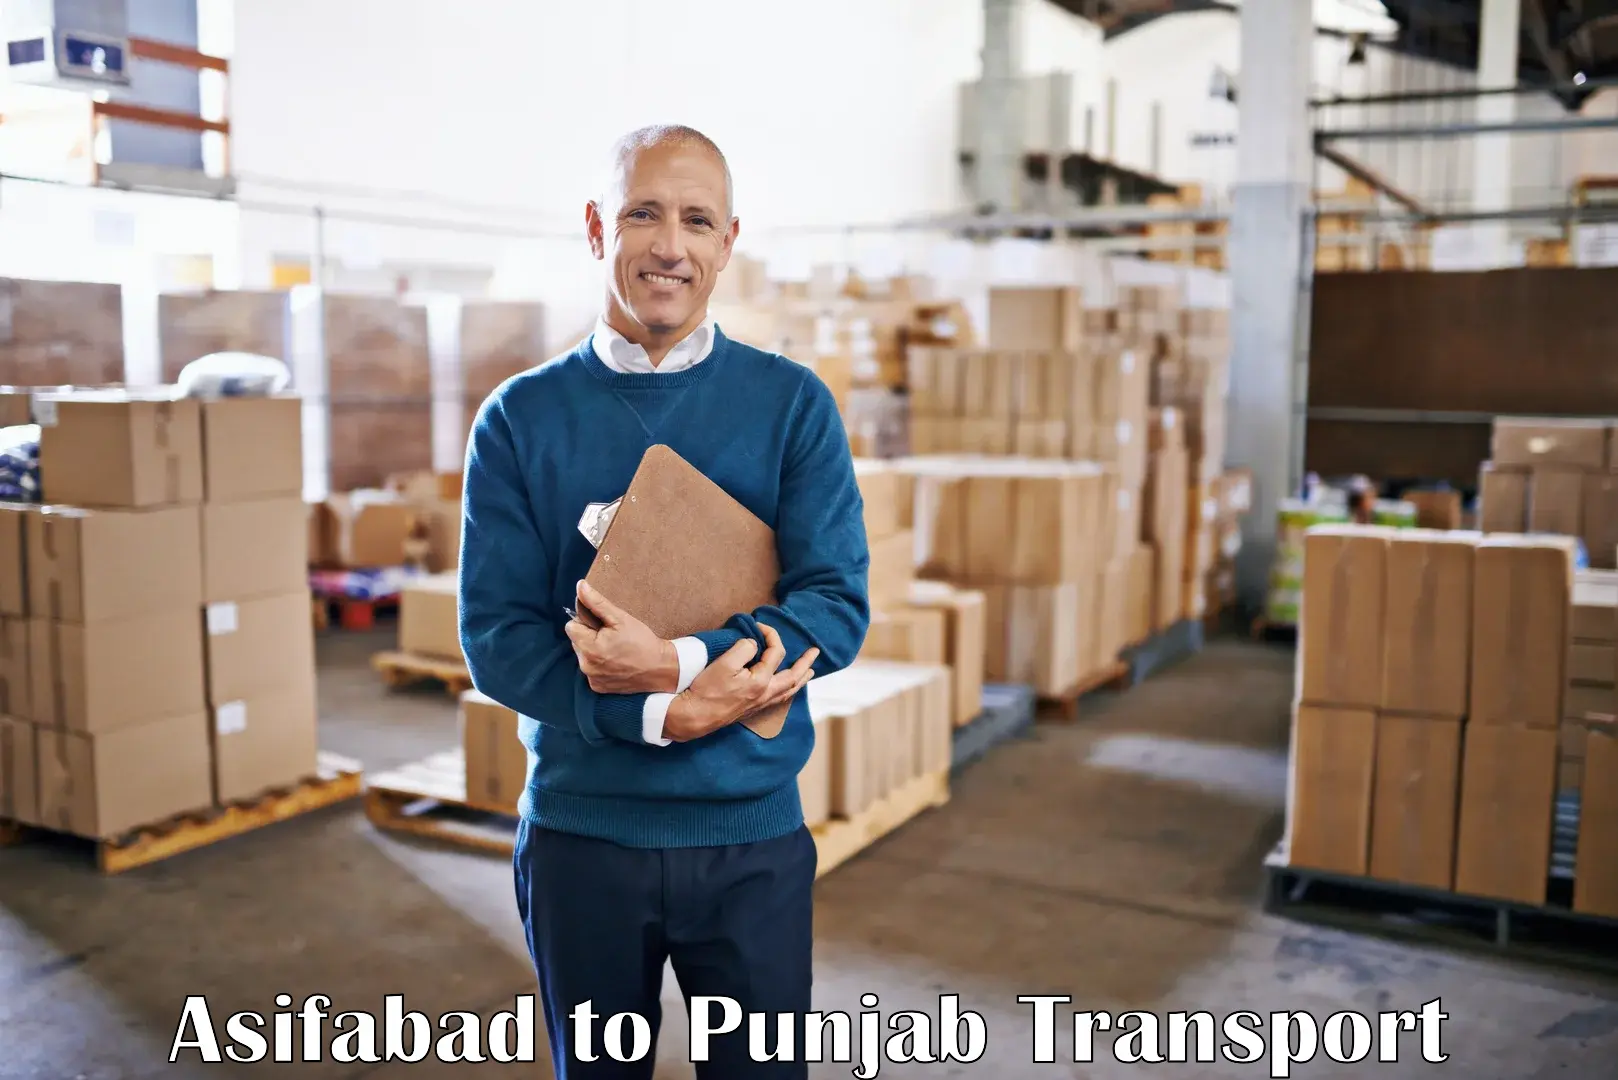 Online transport service Asifabad to Amritsar